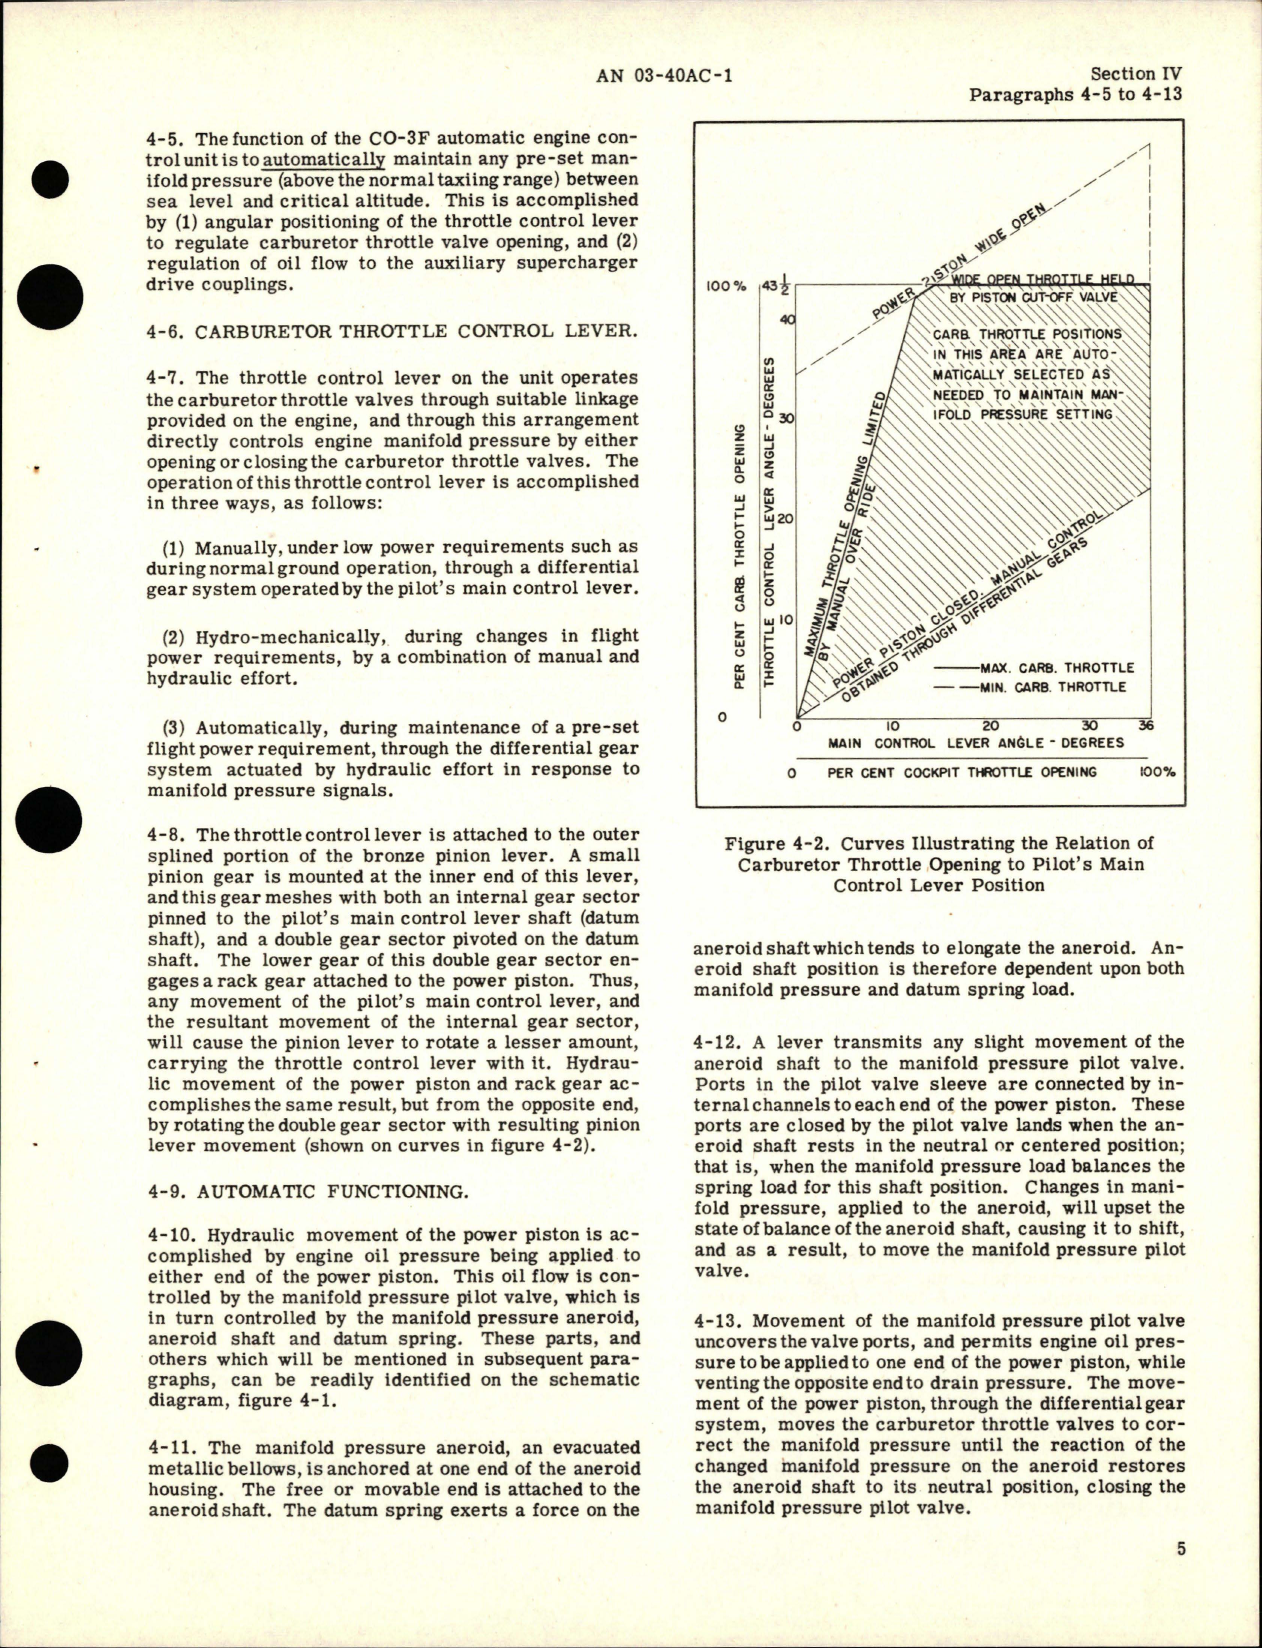 Sample page 9 from AirCorps Library document: Operation, Service and Overhaul Instructions with Parts Catalog for Automatic Engine Control - Model CO-3F